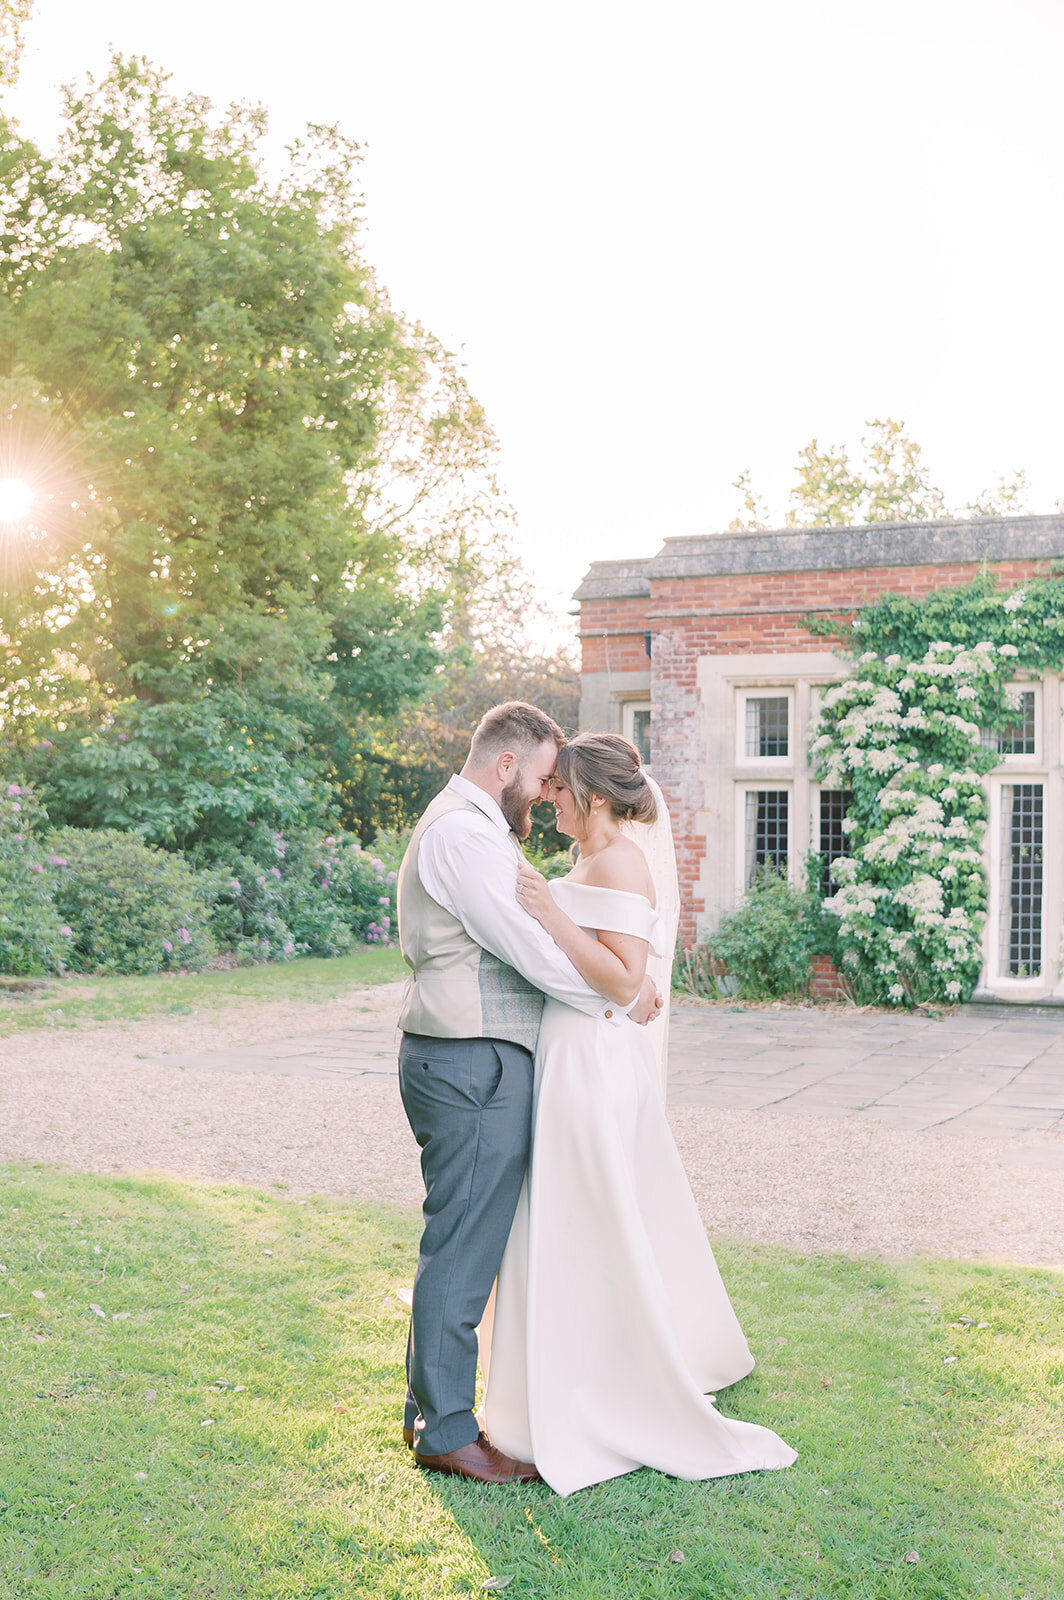 Bride and groom are cuddling face to face with their foreheads touching, the bride is wearing a white dress and the groom is in a suit . The sunset is shining through the trees to the left of the couple